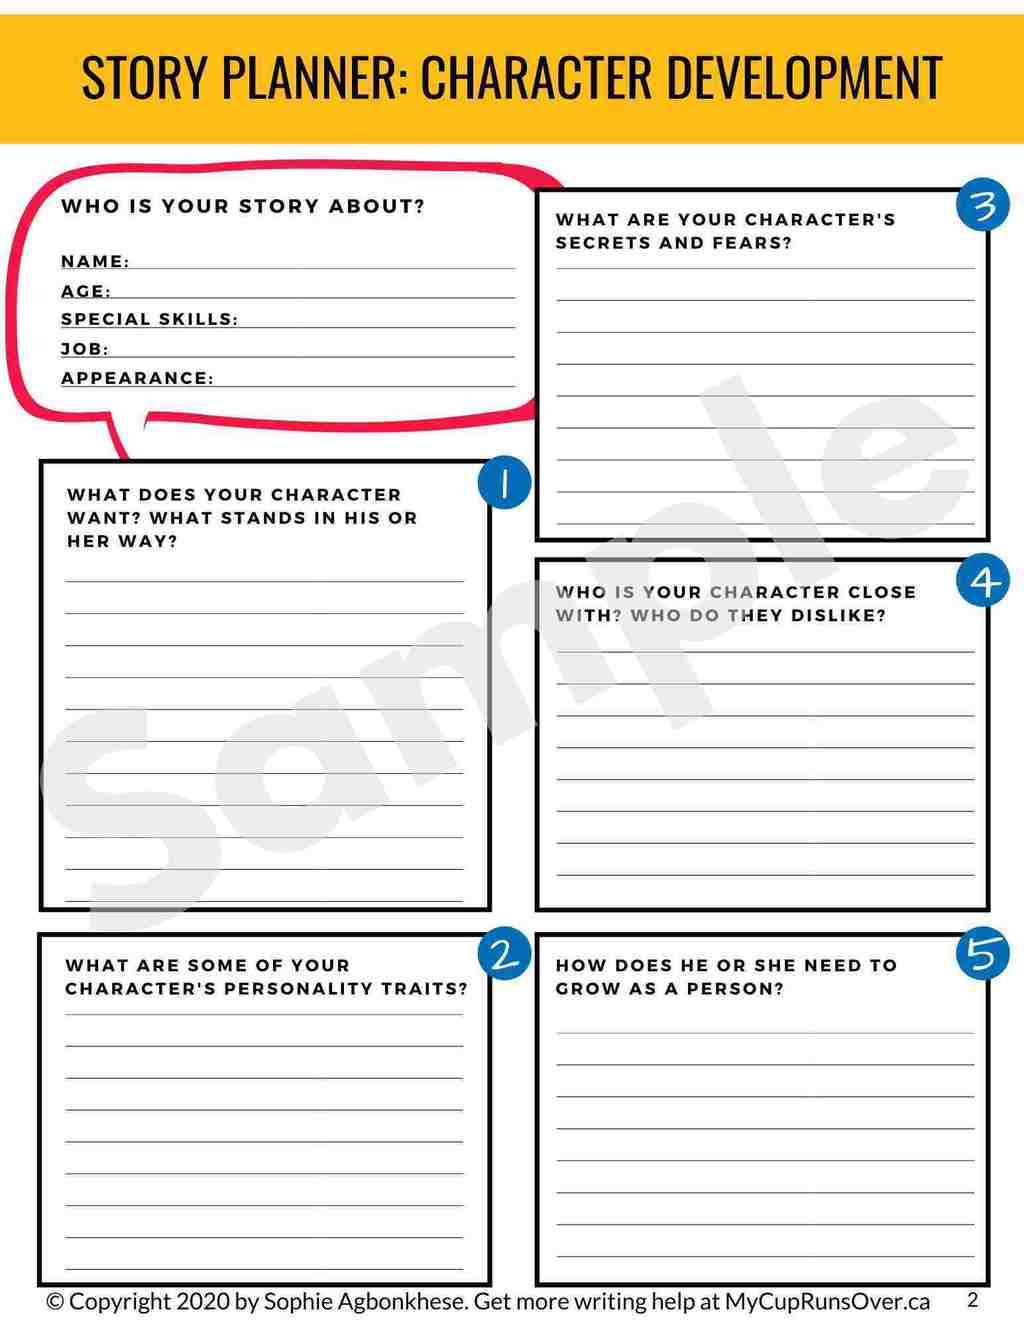 A story planner template helps kids develop their characters more deeply before they begin writing